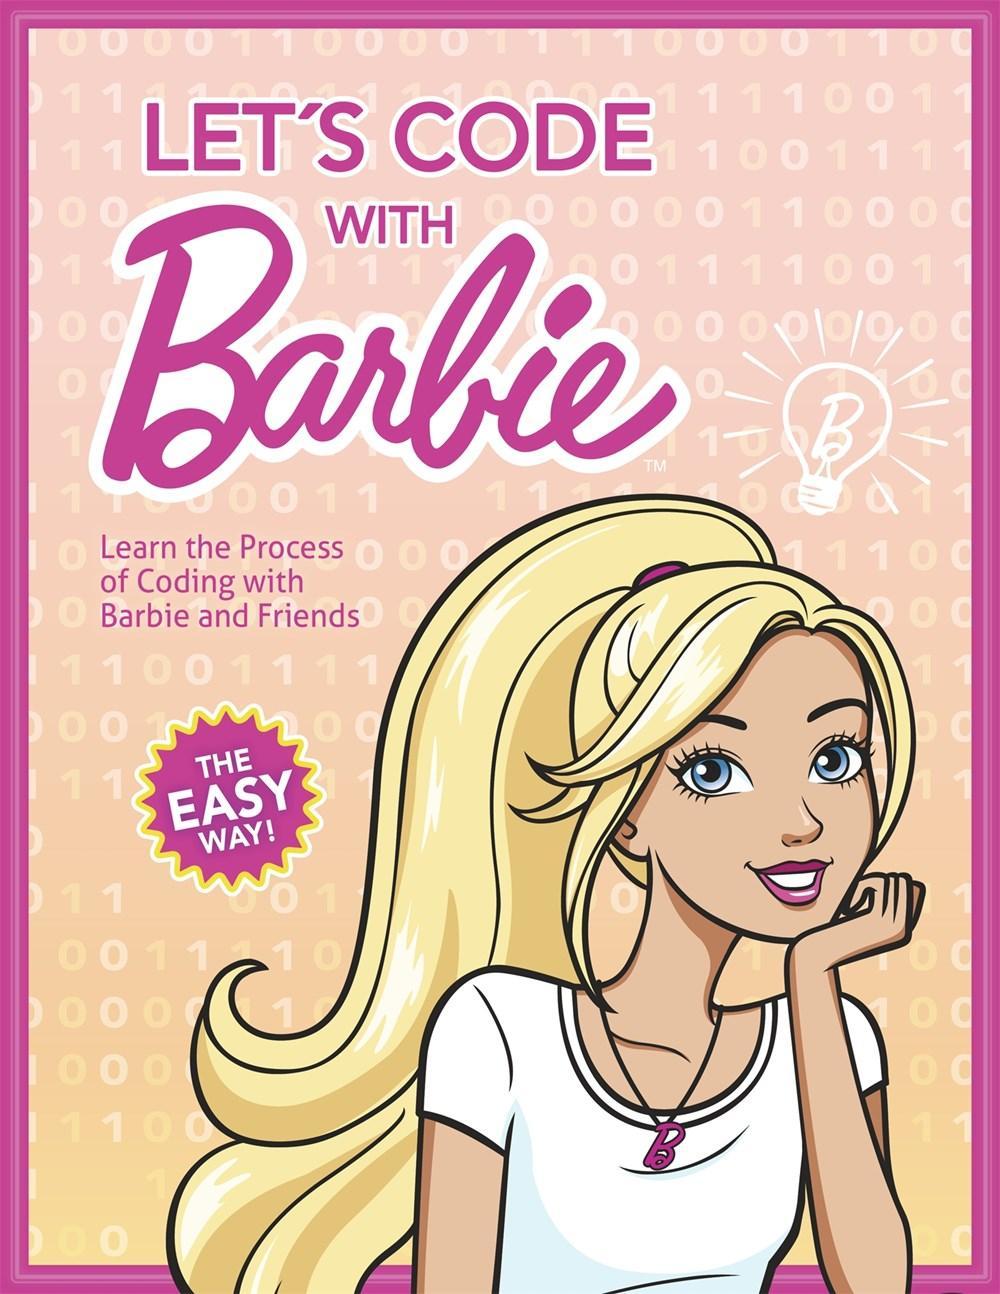 EDDA USA JANUARY 2017 Let's Code With Barbie Barbie can be anything and in this book she is a programmer and she can teach you to be one as well.